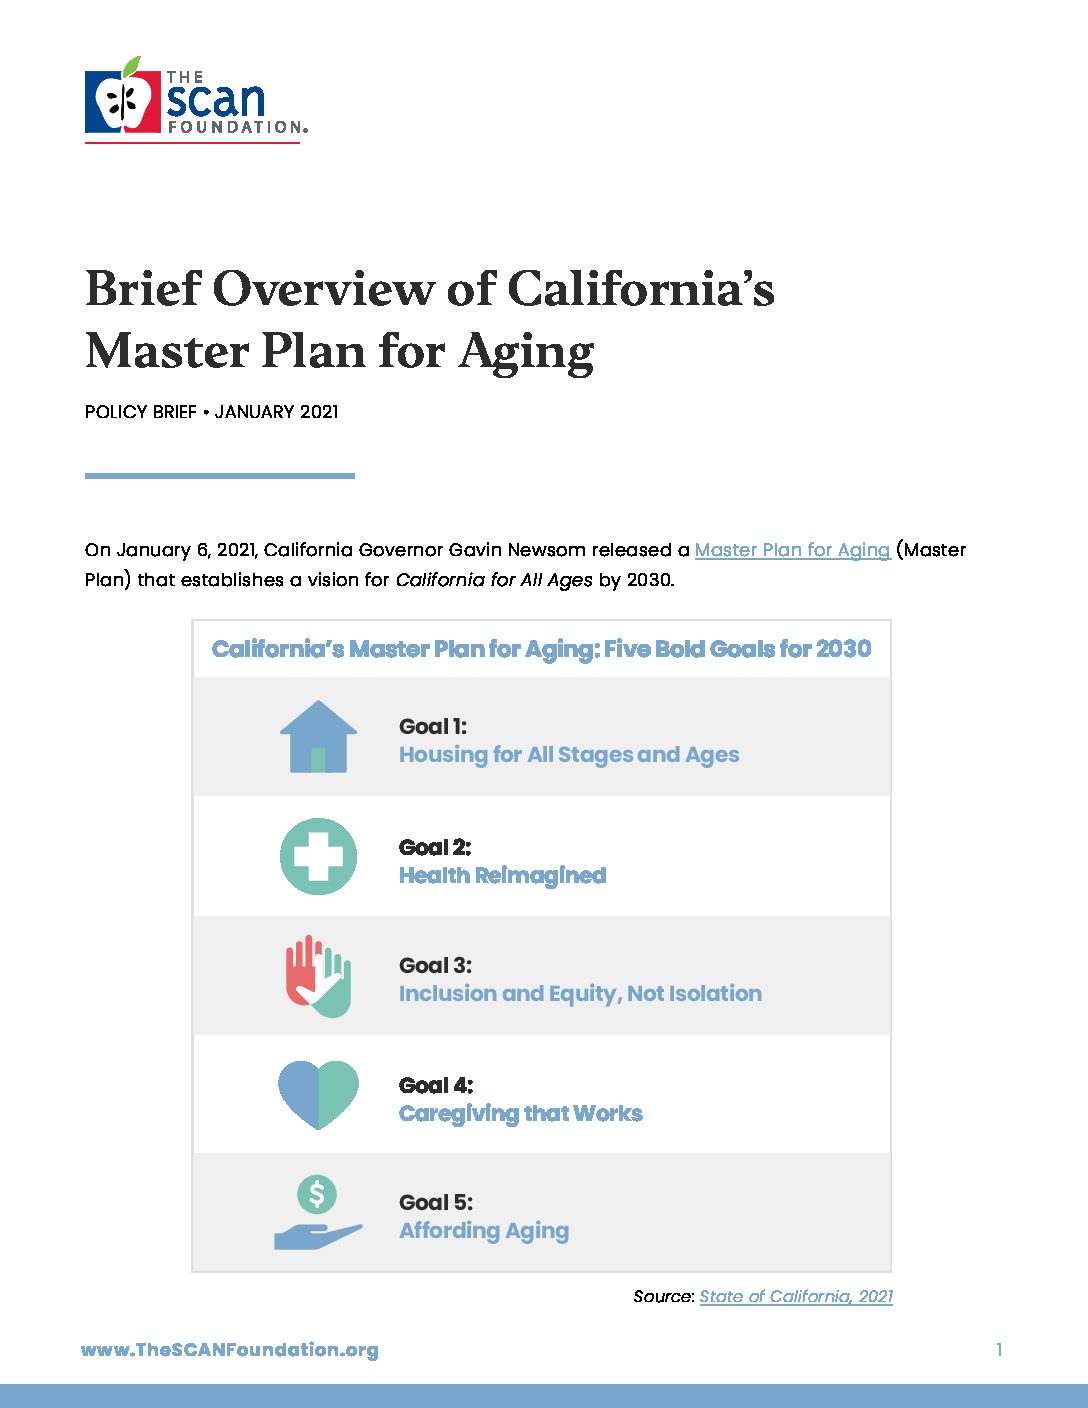 Brief Overview of California’s Master Plan for Aging